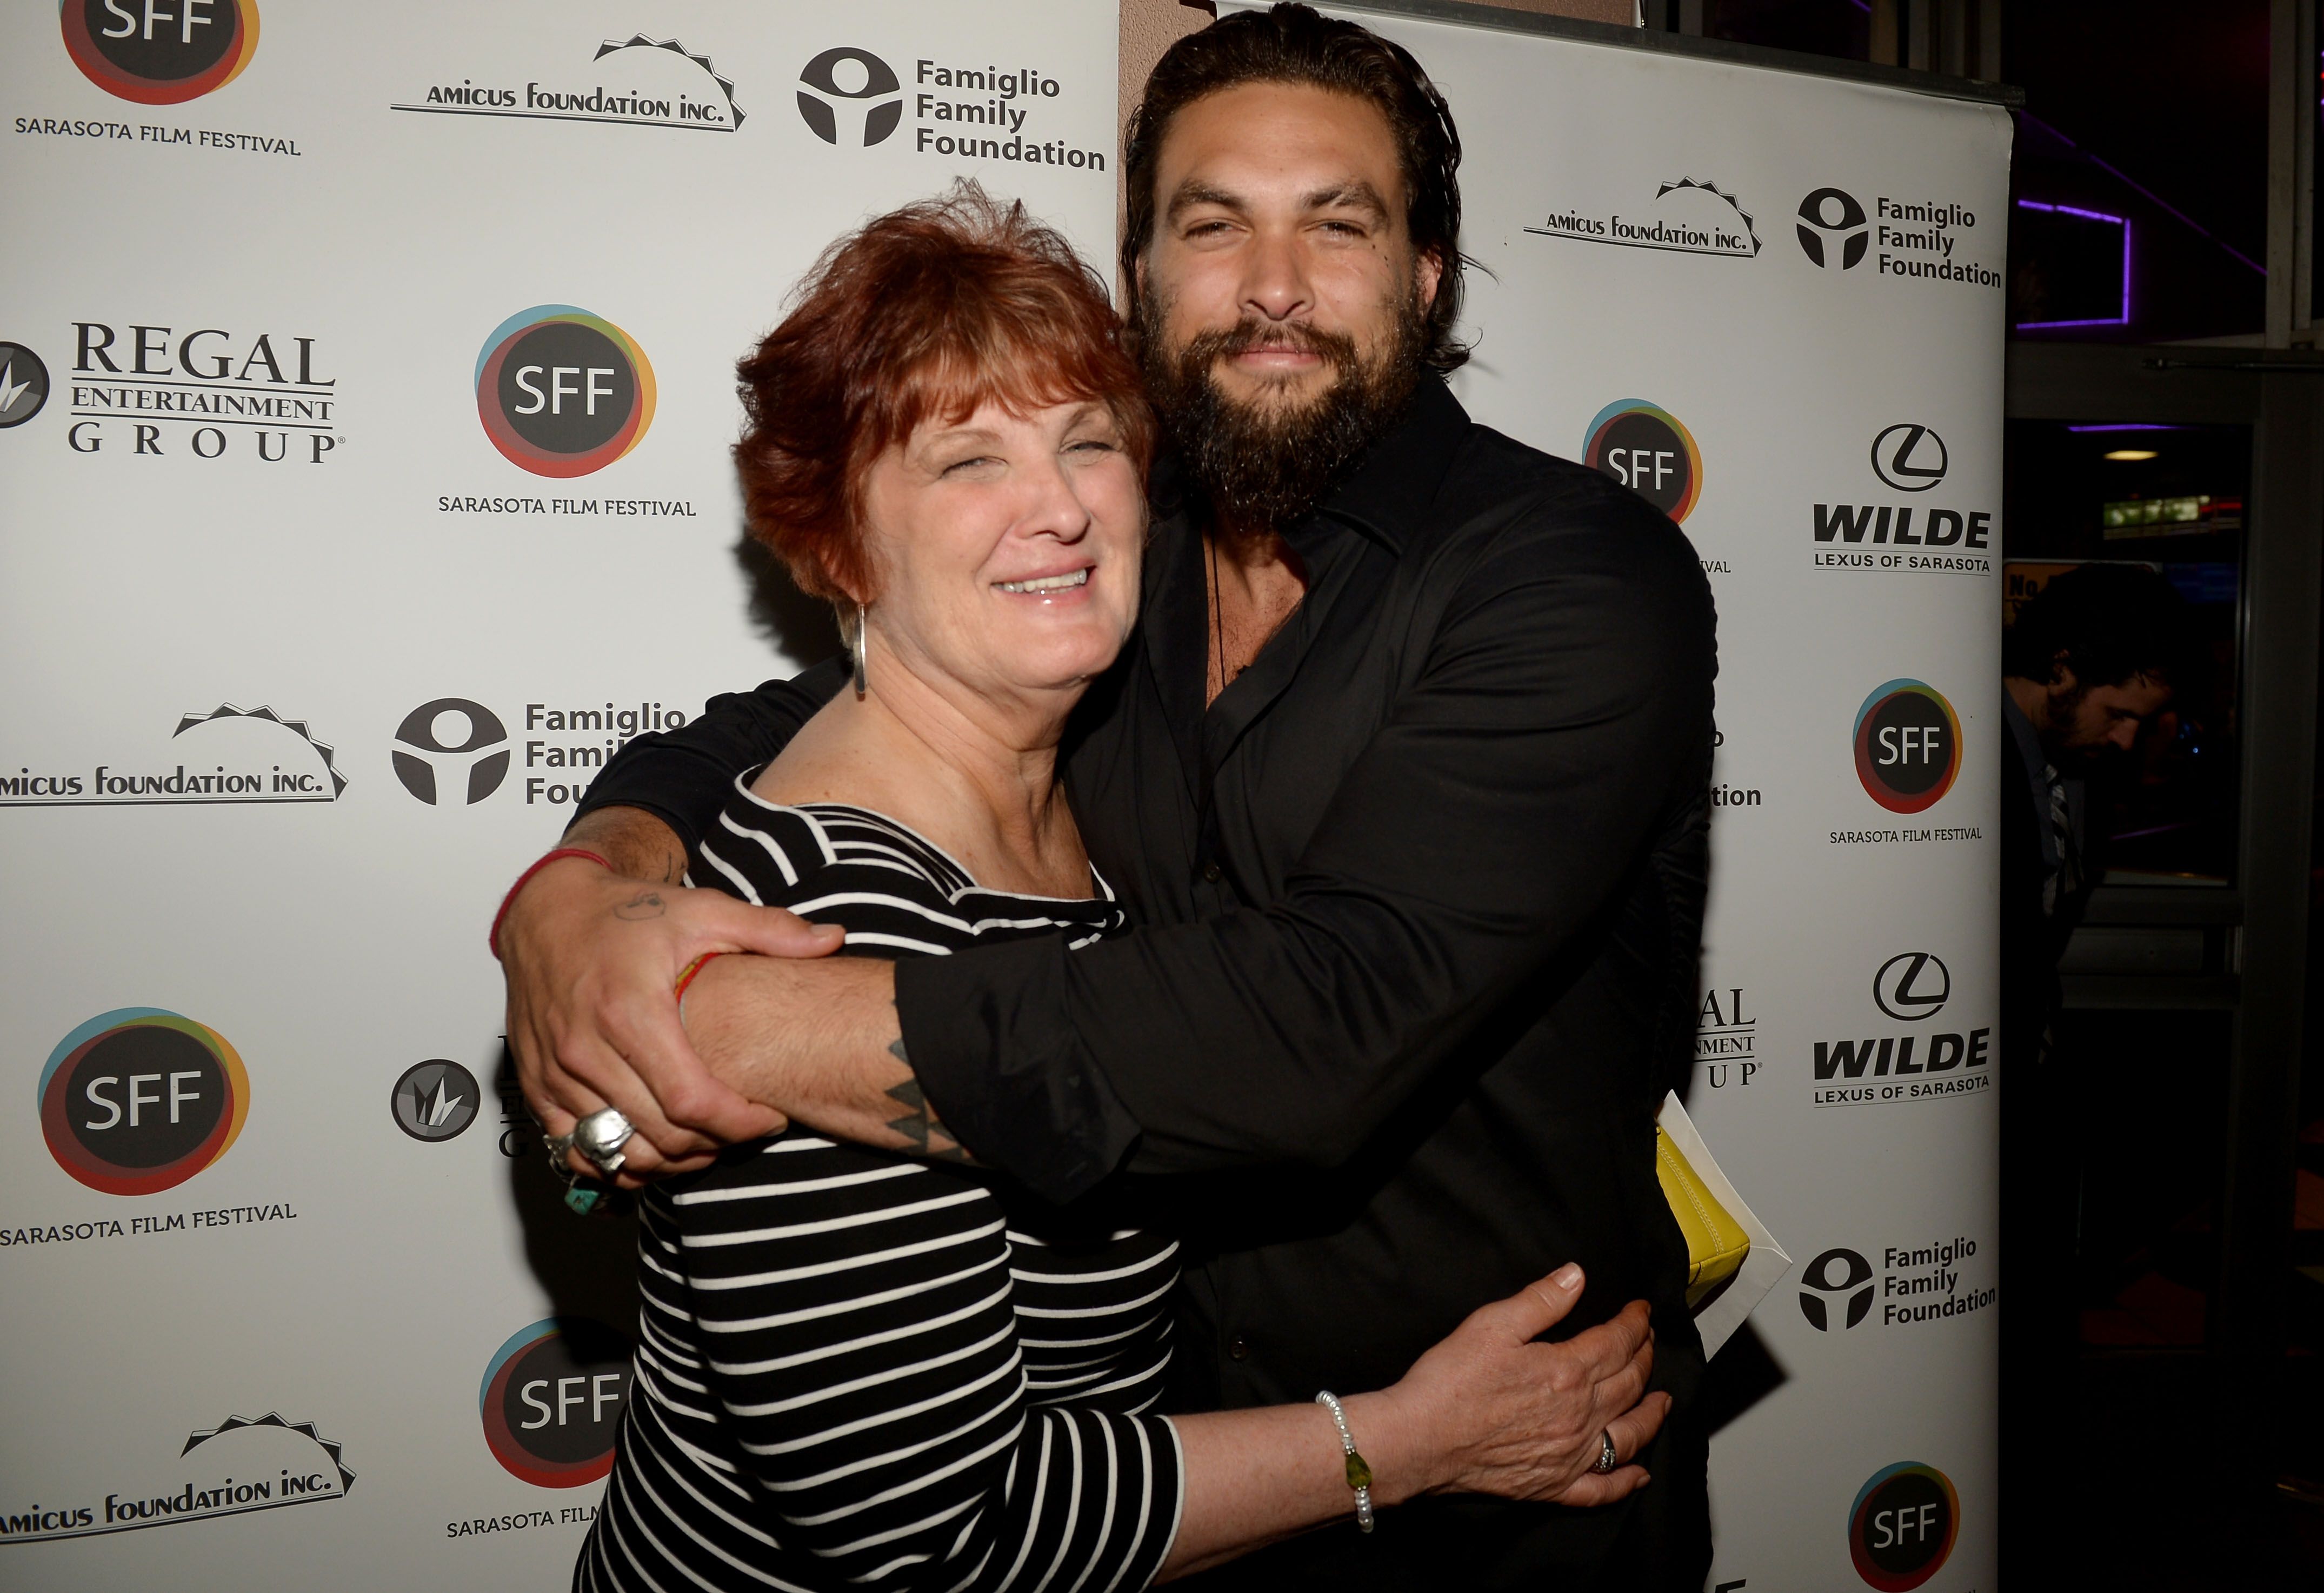 Jason Momoa and Coni Momoa during the screening of "Road to Paloma'" at the Sarasota Film Festival at Regal Cinemas Hollywood Stadium on April 12, 2014, in Sarasota, Florida. | Source: Getty Images